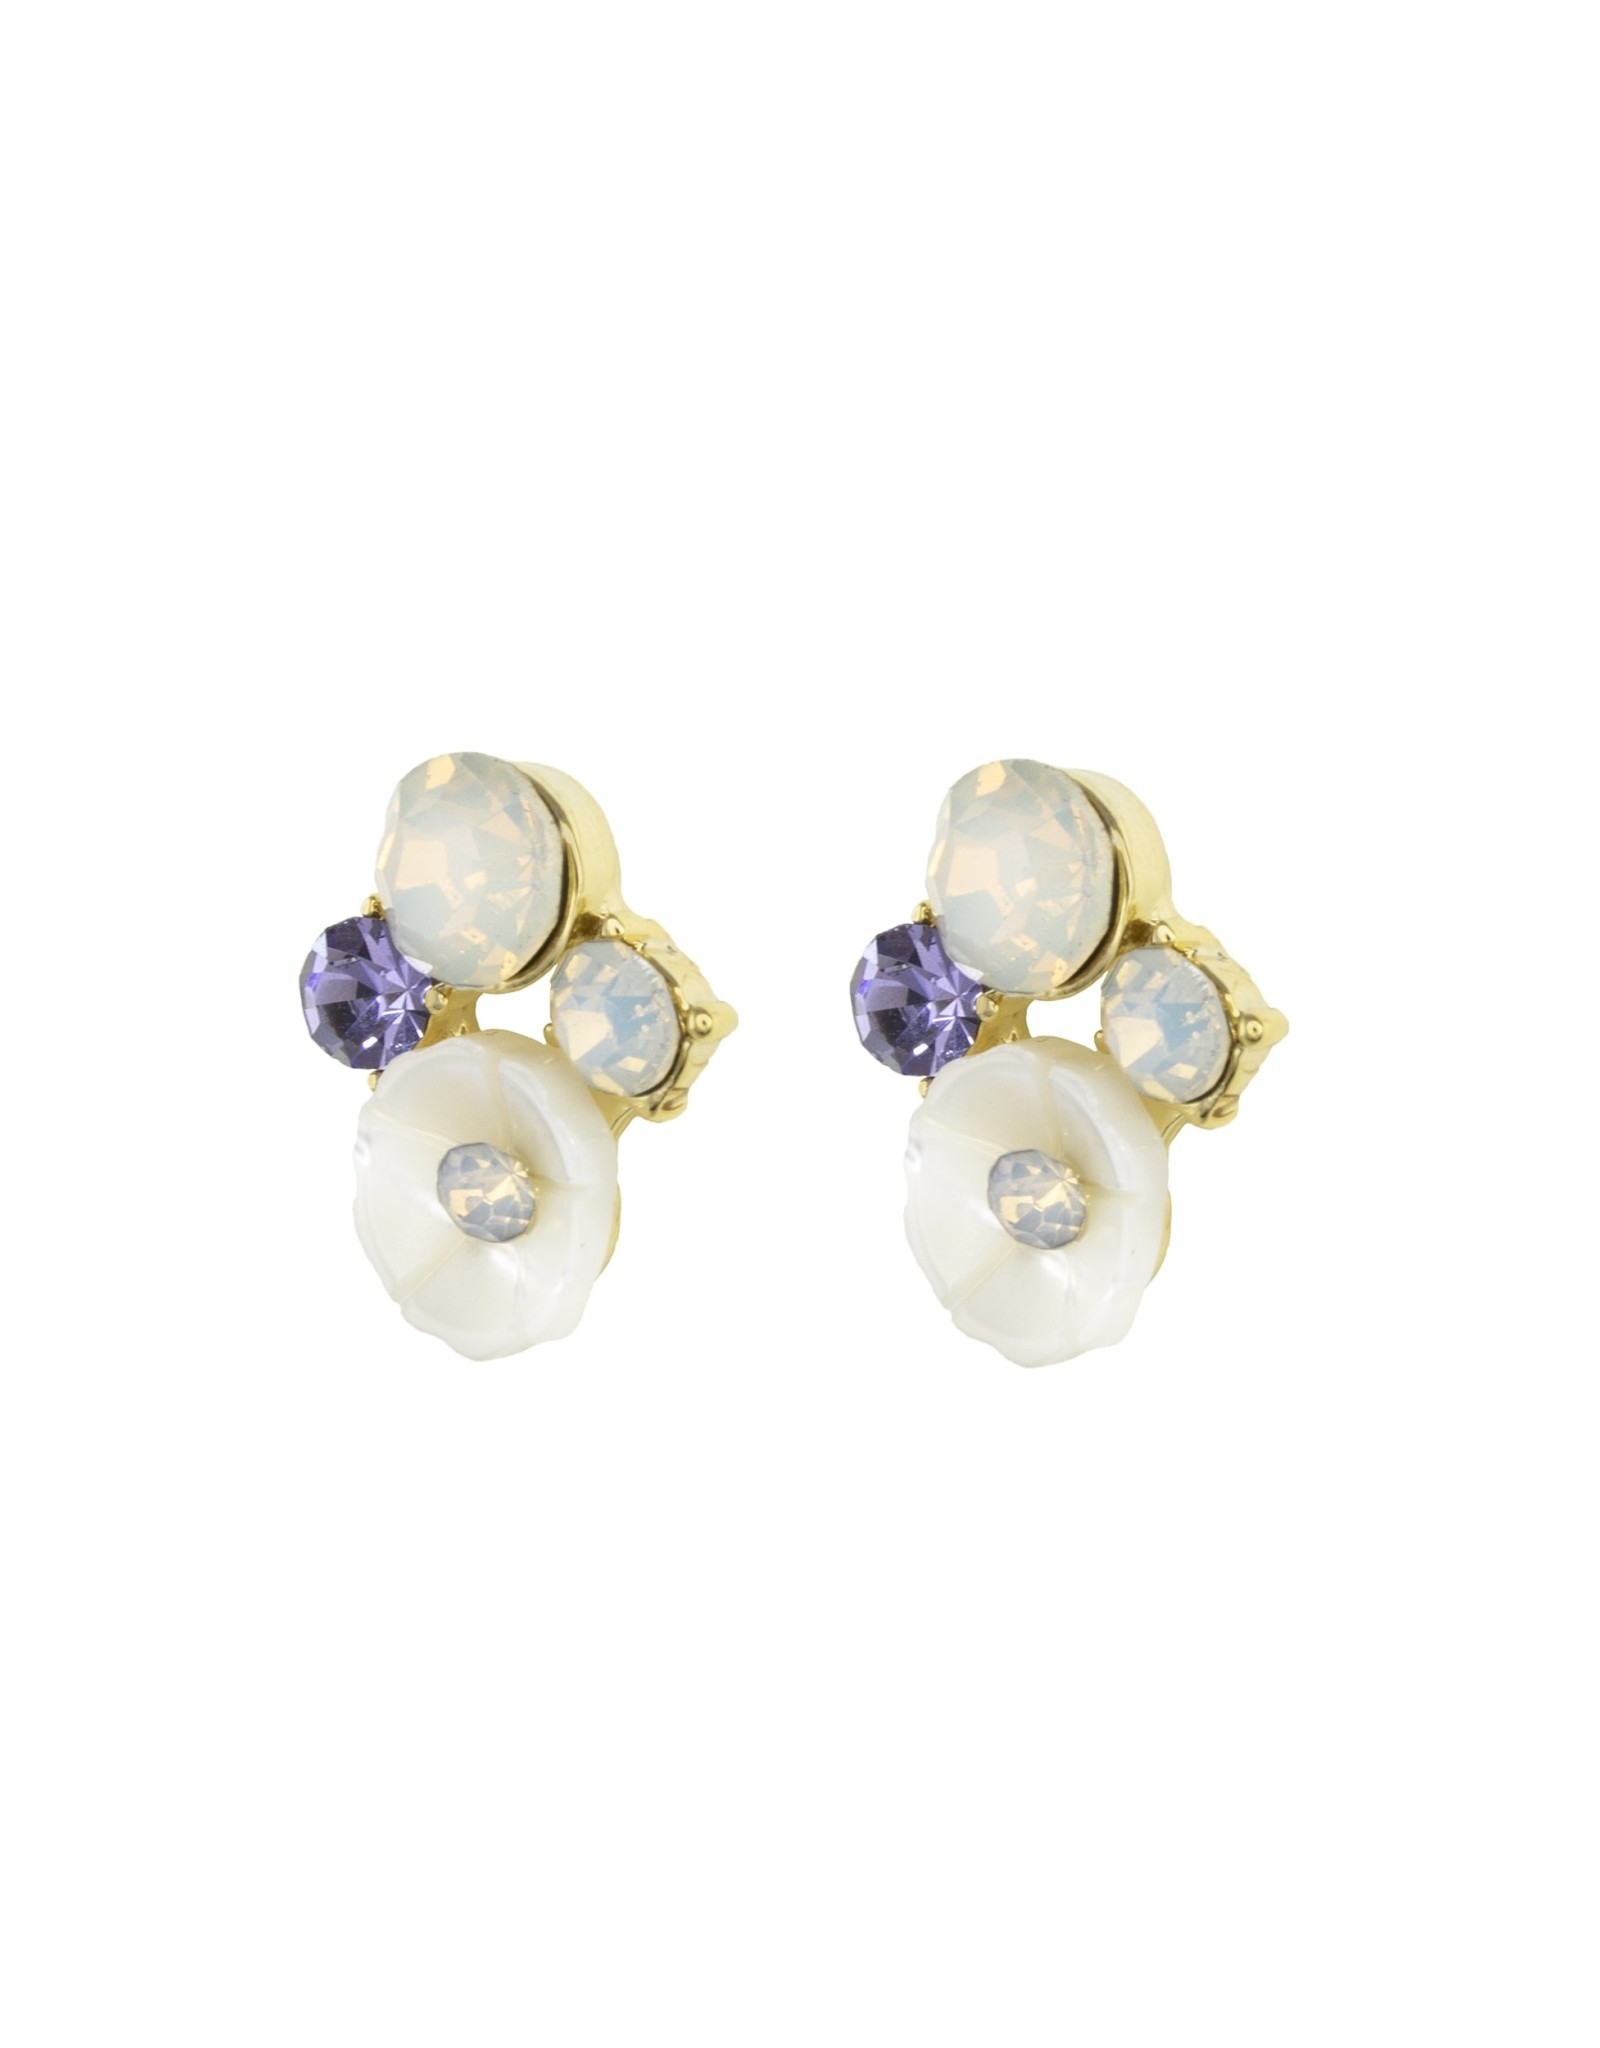 Jackie J Floral stud earring made from a pearl and CZ